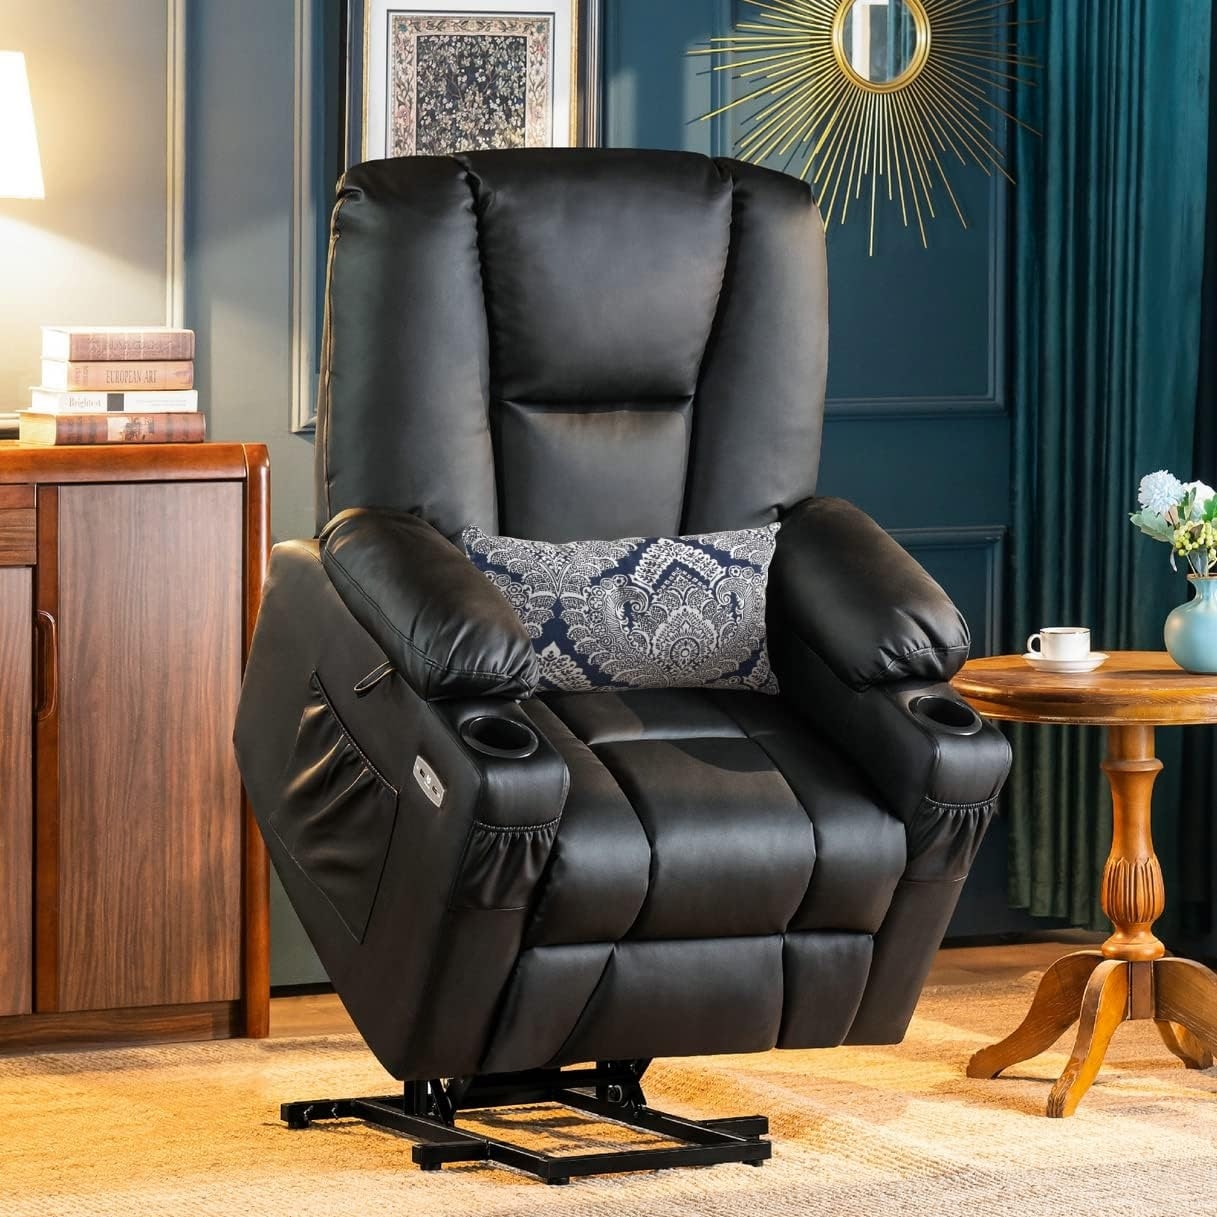 https://ak1.ostkcdn.com/images/products/is/images/direct/e2552510001c46cfaaee8f99120088d62cb86cd9/Mcombo-Electric-Power-Lift-Recliner-Chair-with-Extended-Footrest-for-Elderly%2C-Lumbar-Pillow%2C-Cup-Holders%2C-Faux-Leather-7507.jpg